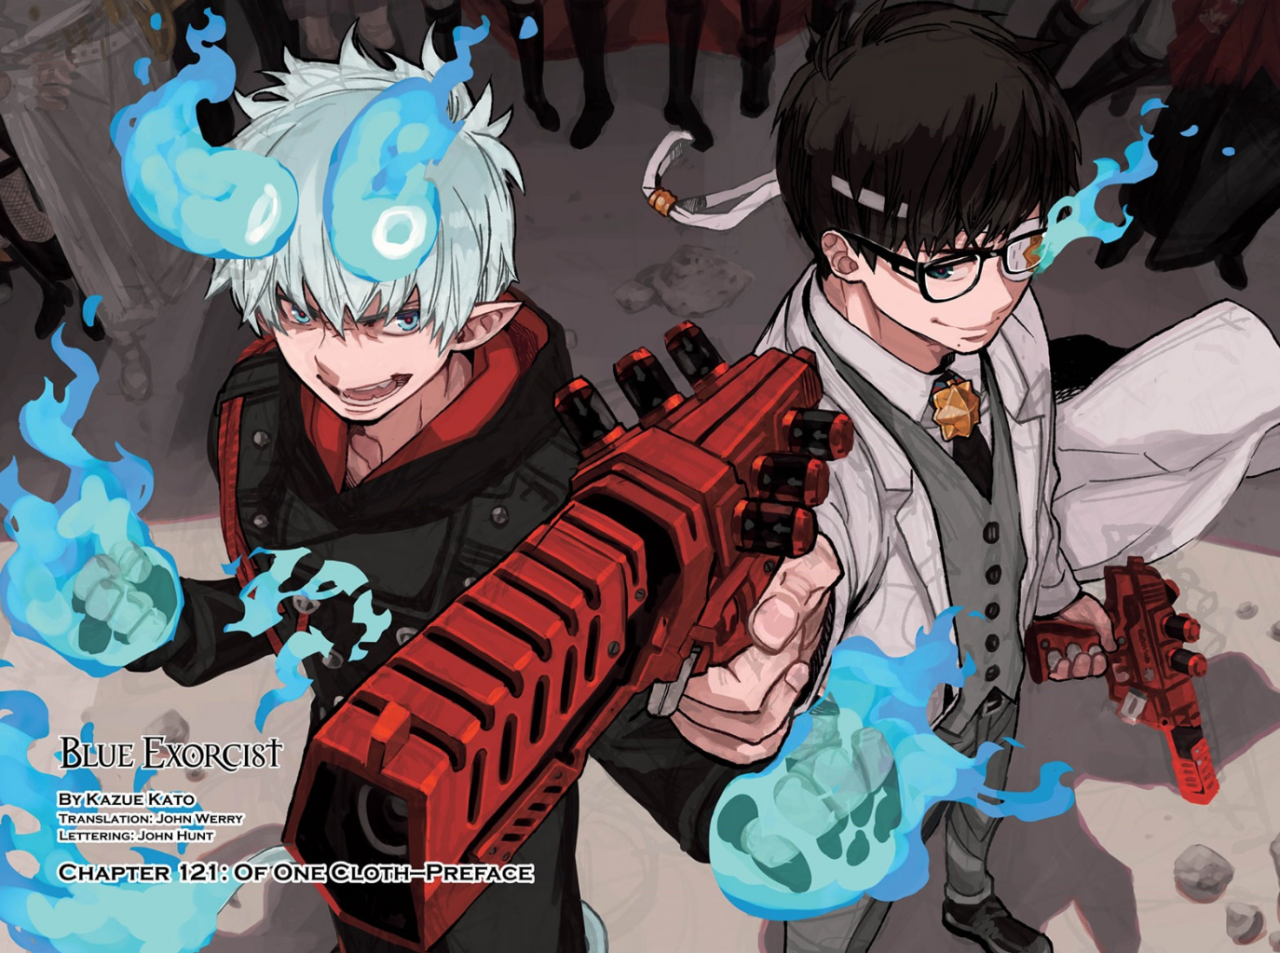 Blue Exorcist chapter 121 color spread.